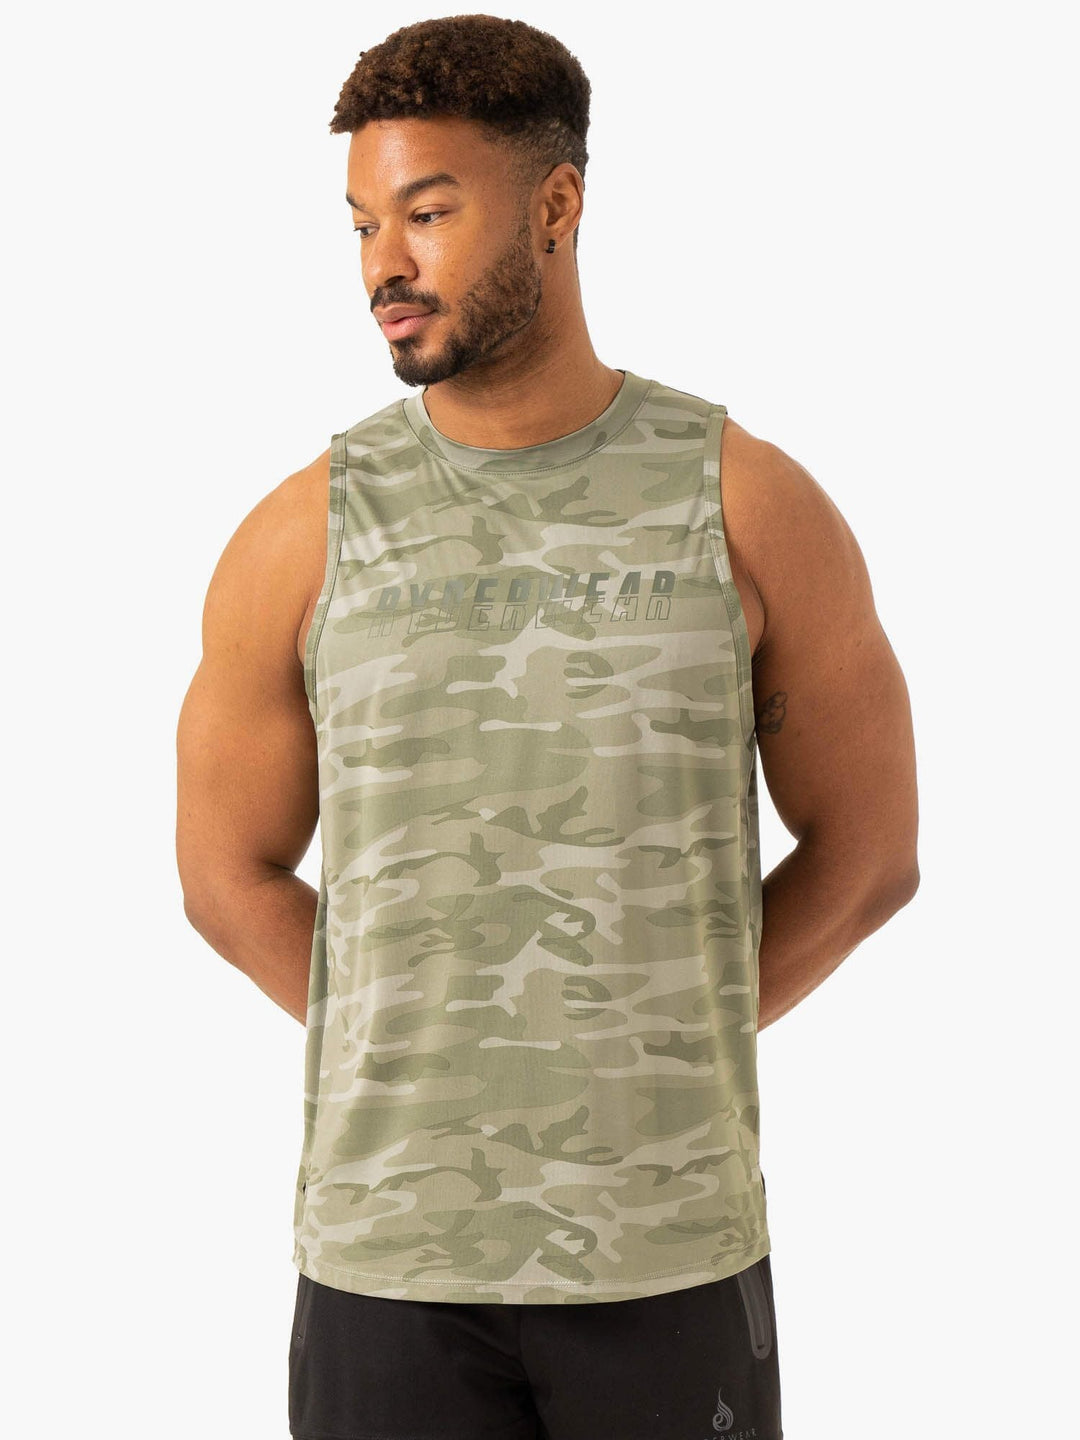 Overdrive Tank - Sage Green Camo Clothing Ryderwear 